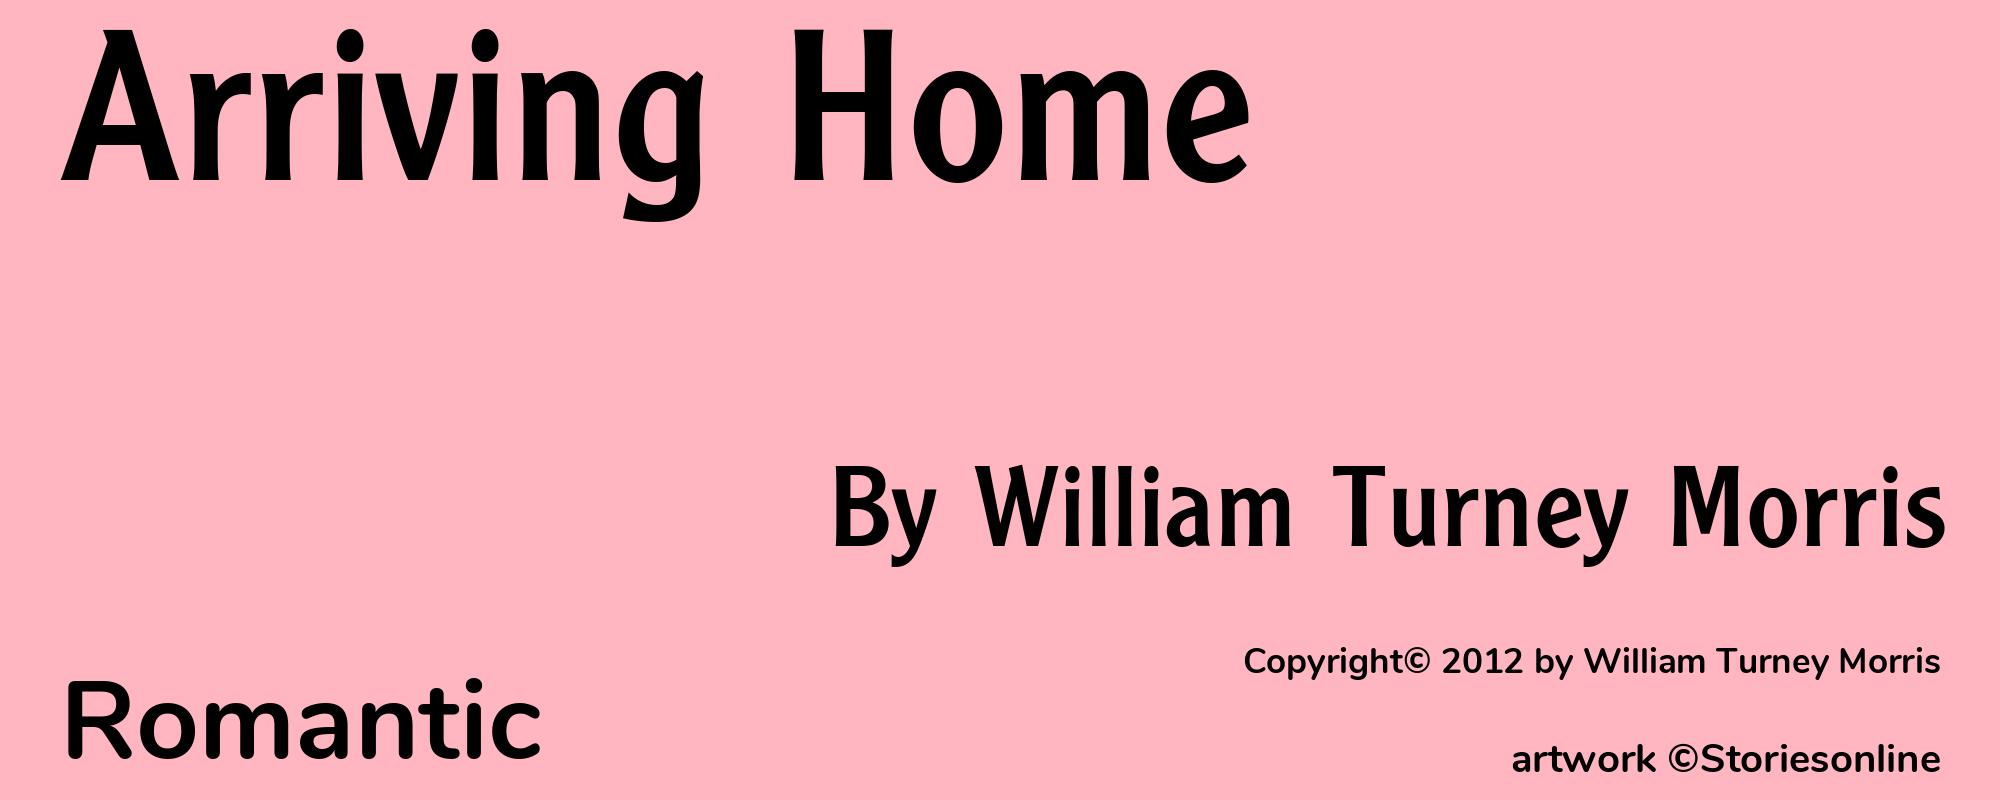 Arriving Home - Cover